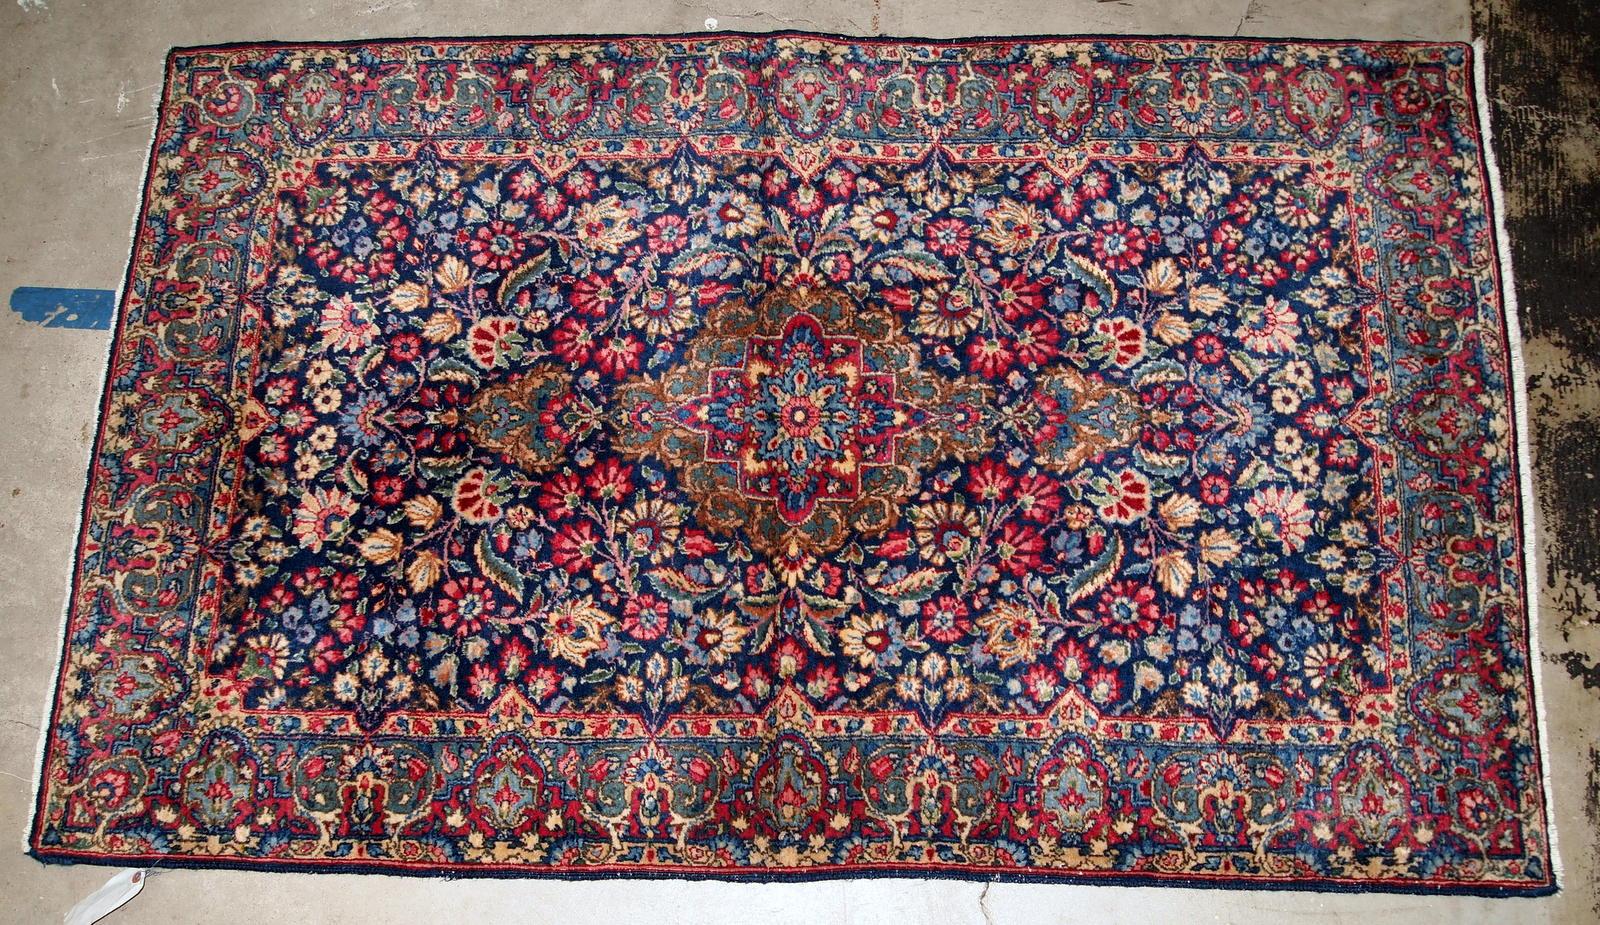 Handmade antique Kerman rug from the beginning of 20th century. The rug is in original good condition made in colorful shades and floral design.

-condition: original good,

-circa 1920s,

-size: 4' x 6.4' (122cm x 195cm),

-material: